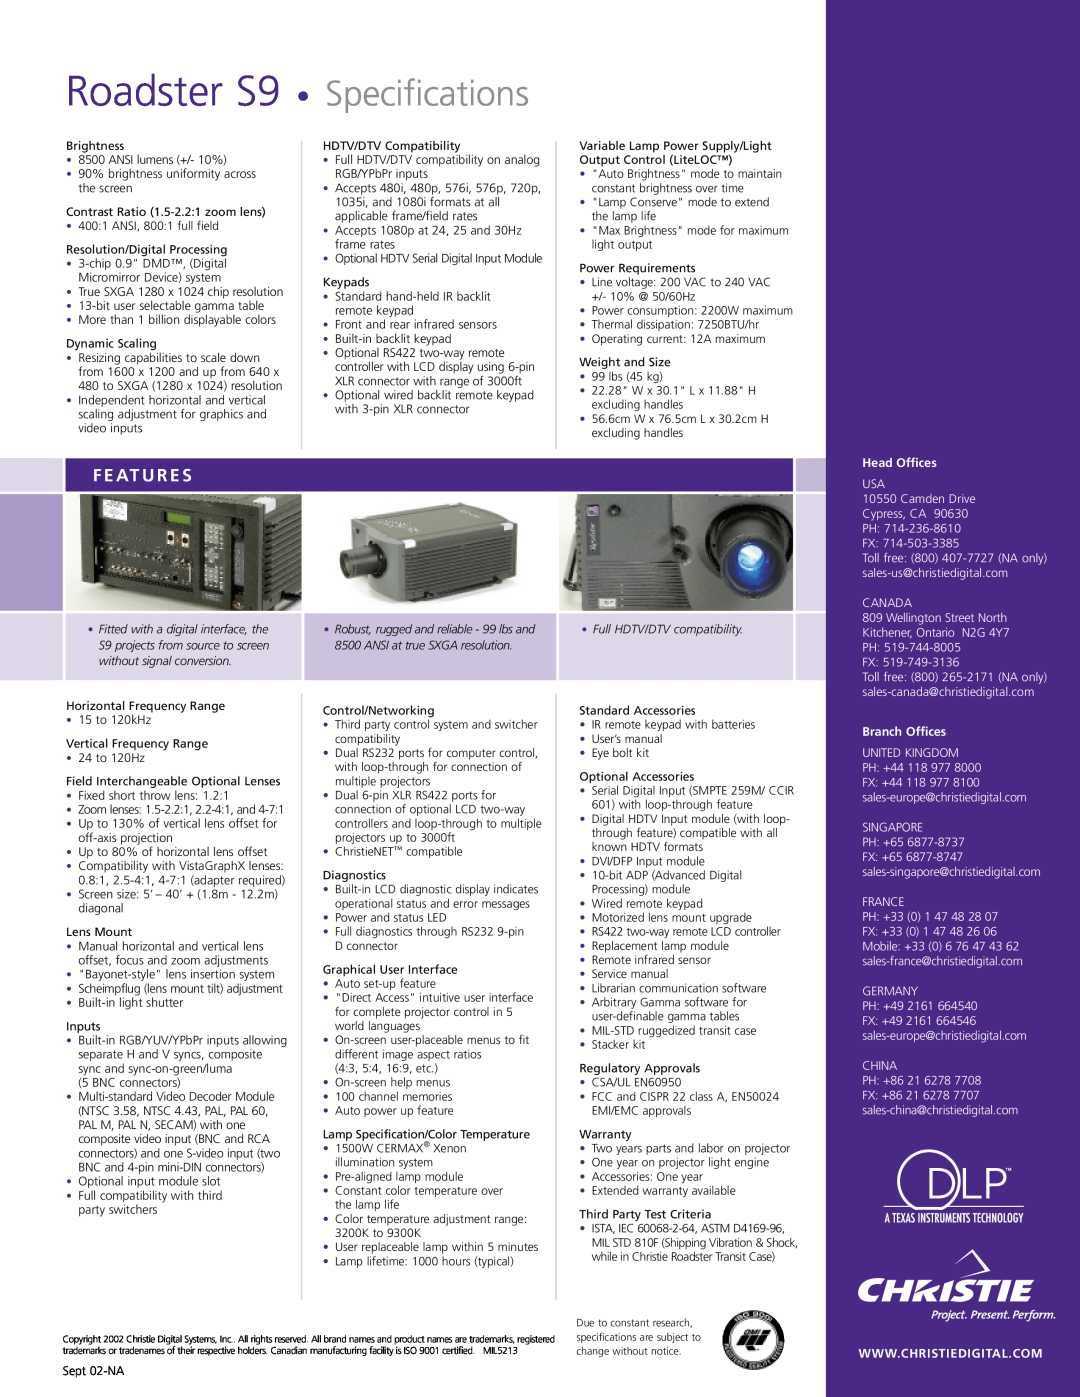 Christie Digital Systems manual F E At U R E S, Roadster S9 Specifications, Head Offices, Full HDTV/DTV compatibility 